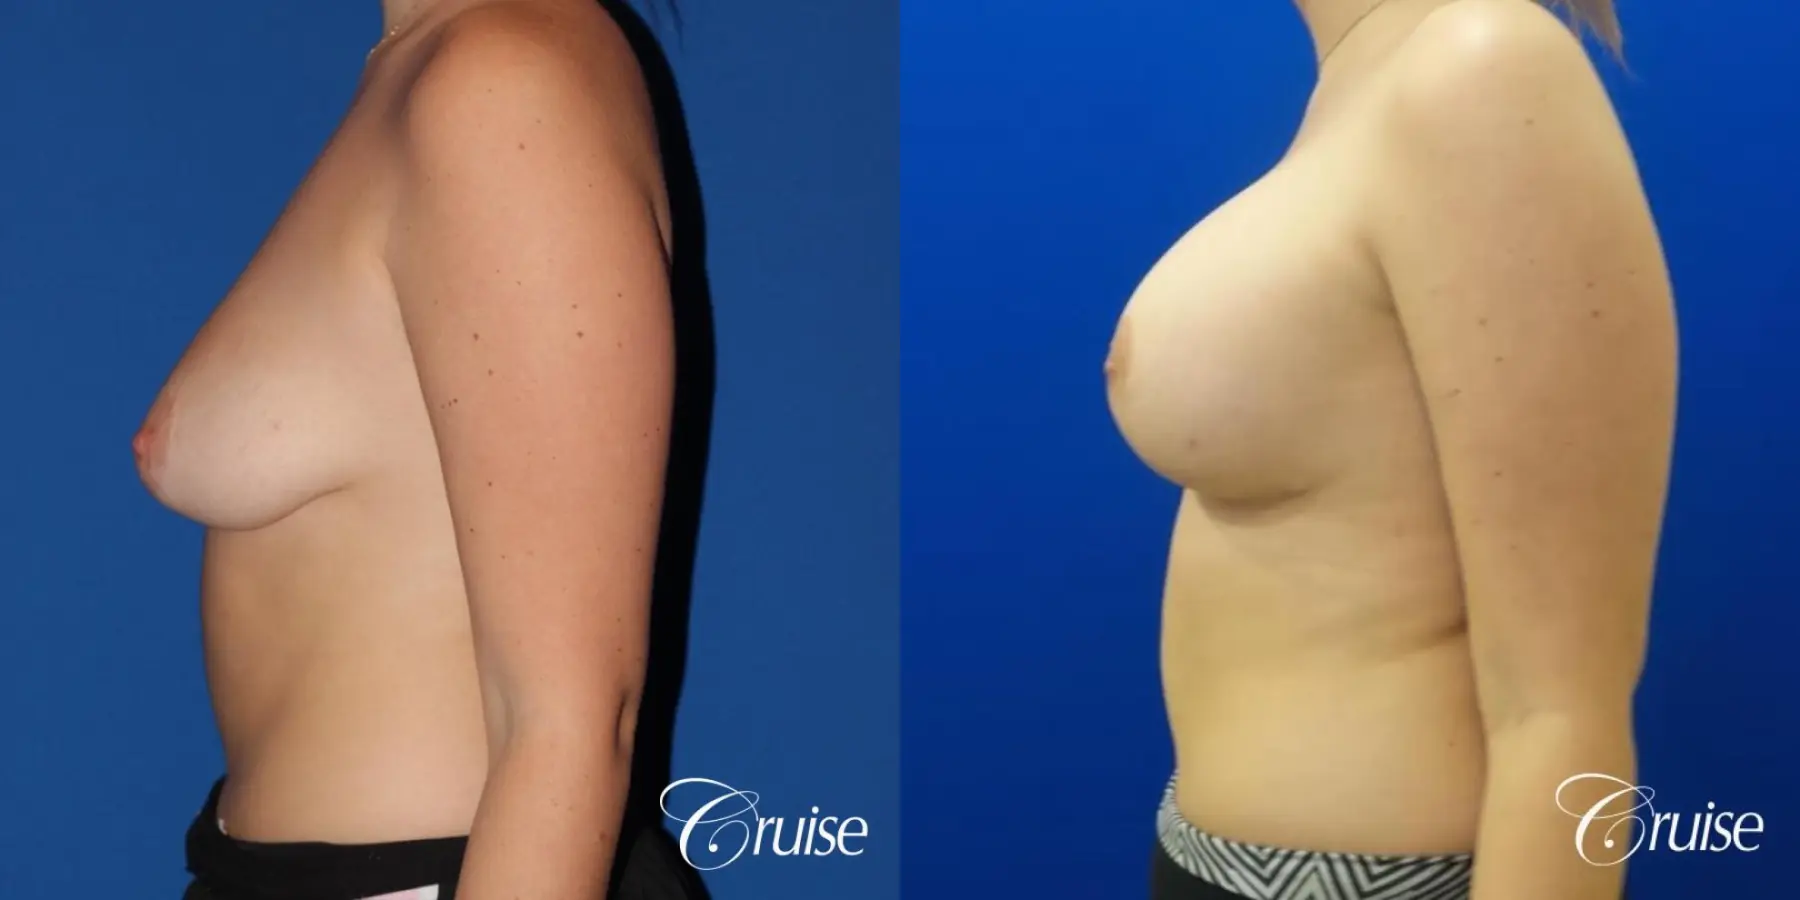 silicone implants with breast lift anchor newport beach - Before and After 2